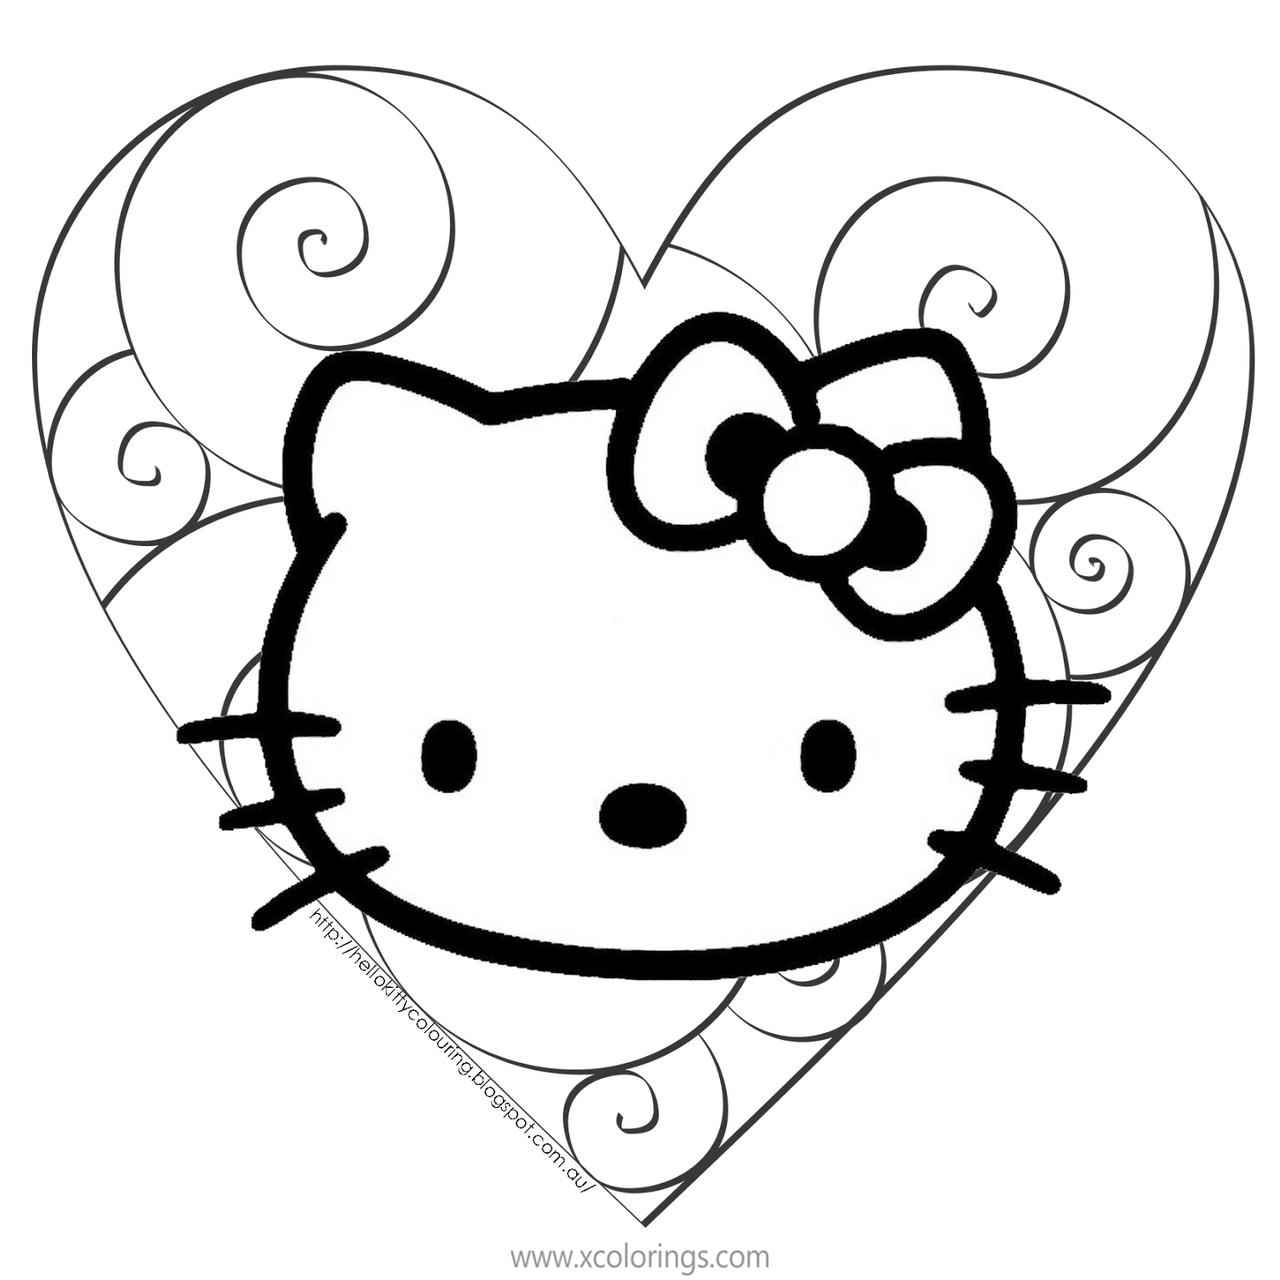 Free Hello Kitty Valentines Day Coloring Pages with Heart printable